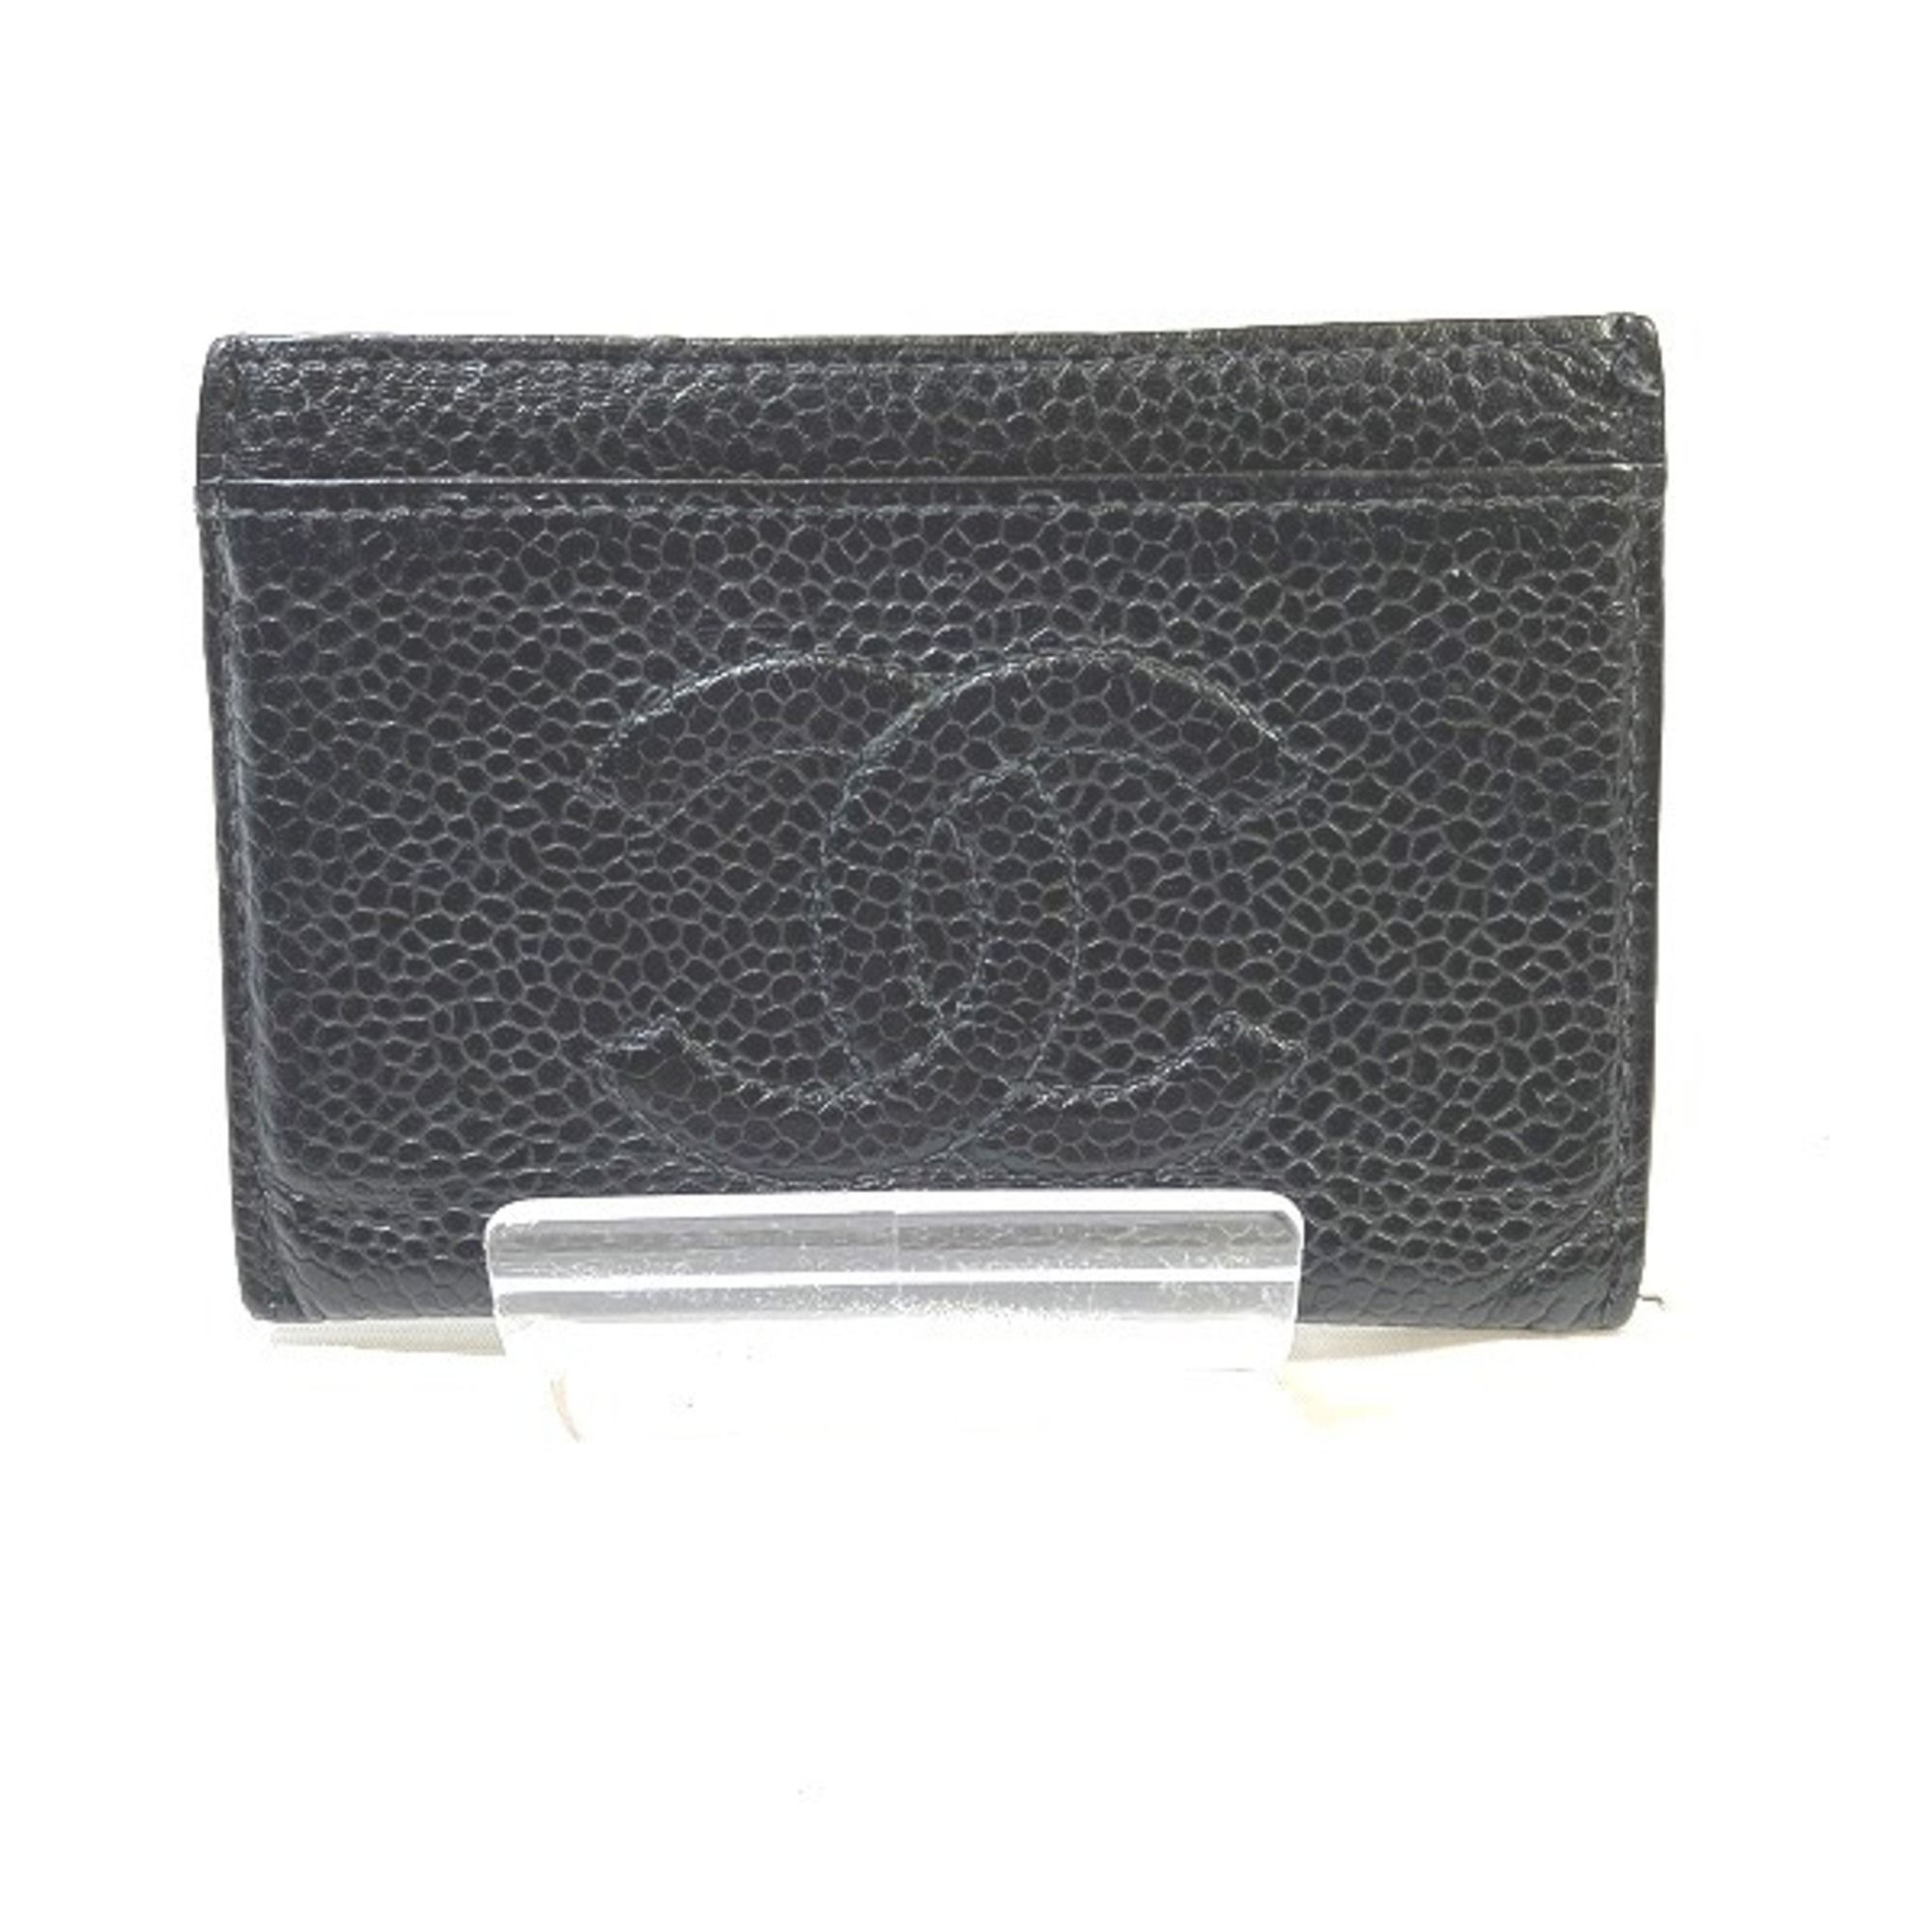 Chanel CHANEL Card Holder Brand Accessories Business Ladies